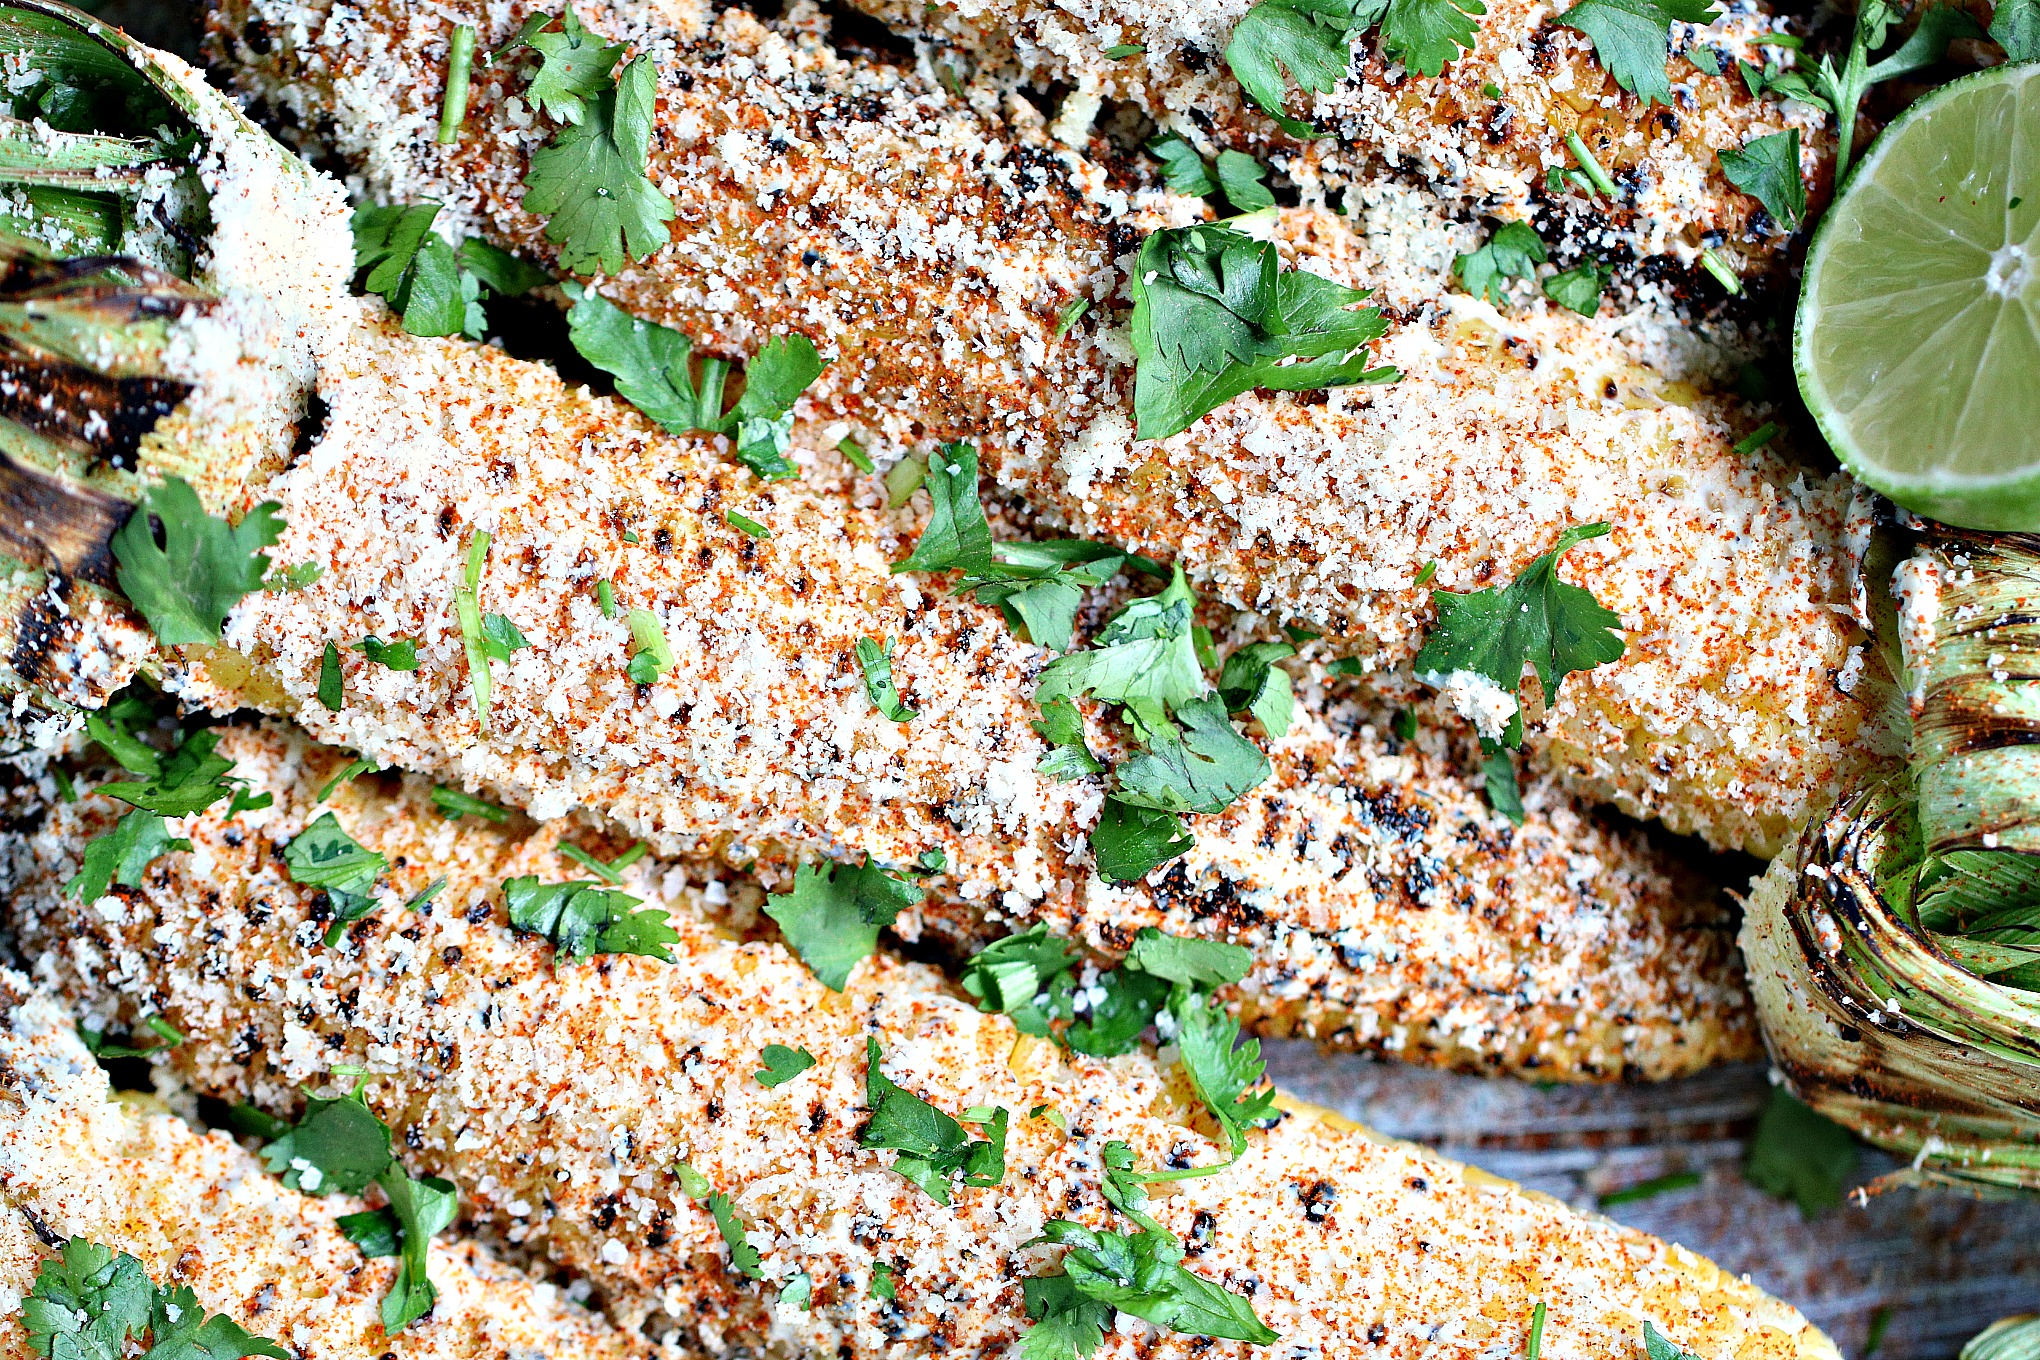 Grilled Mexican Street Corn (Elotes) cooked to perfection.